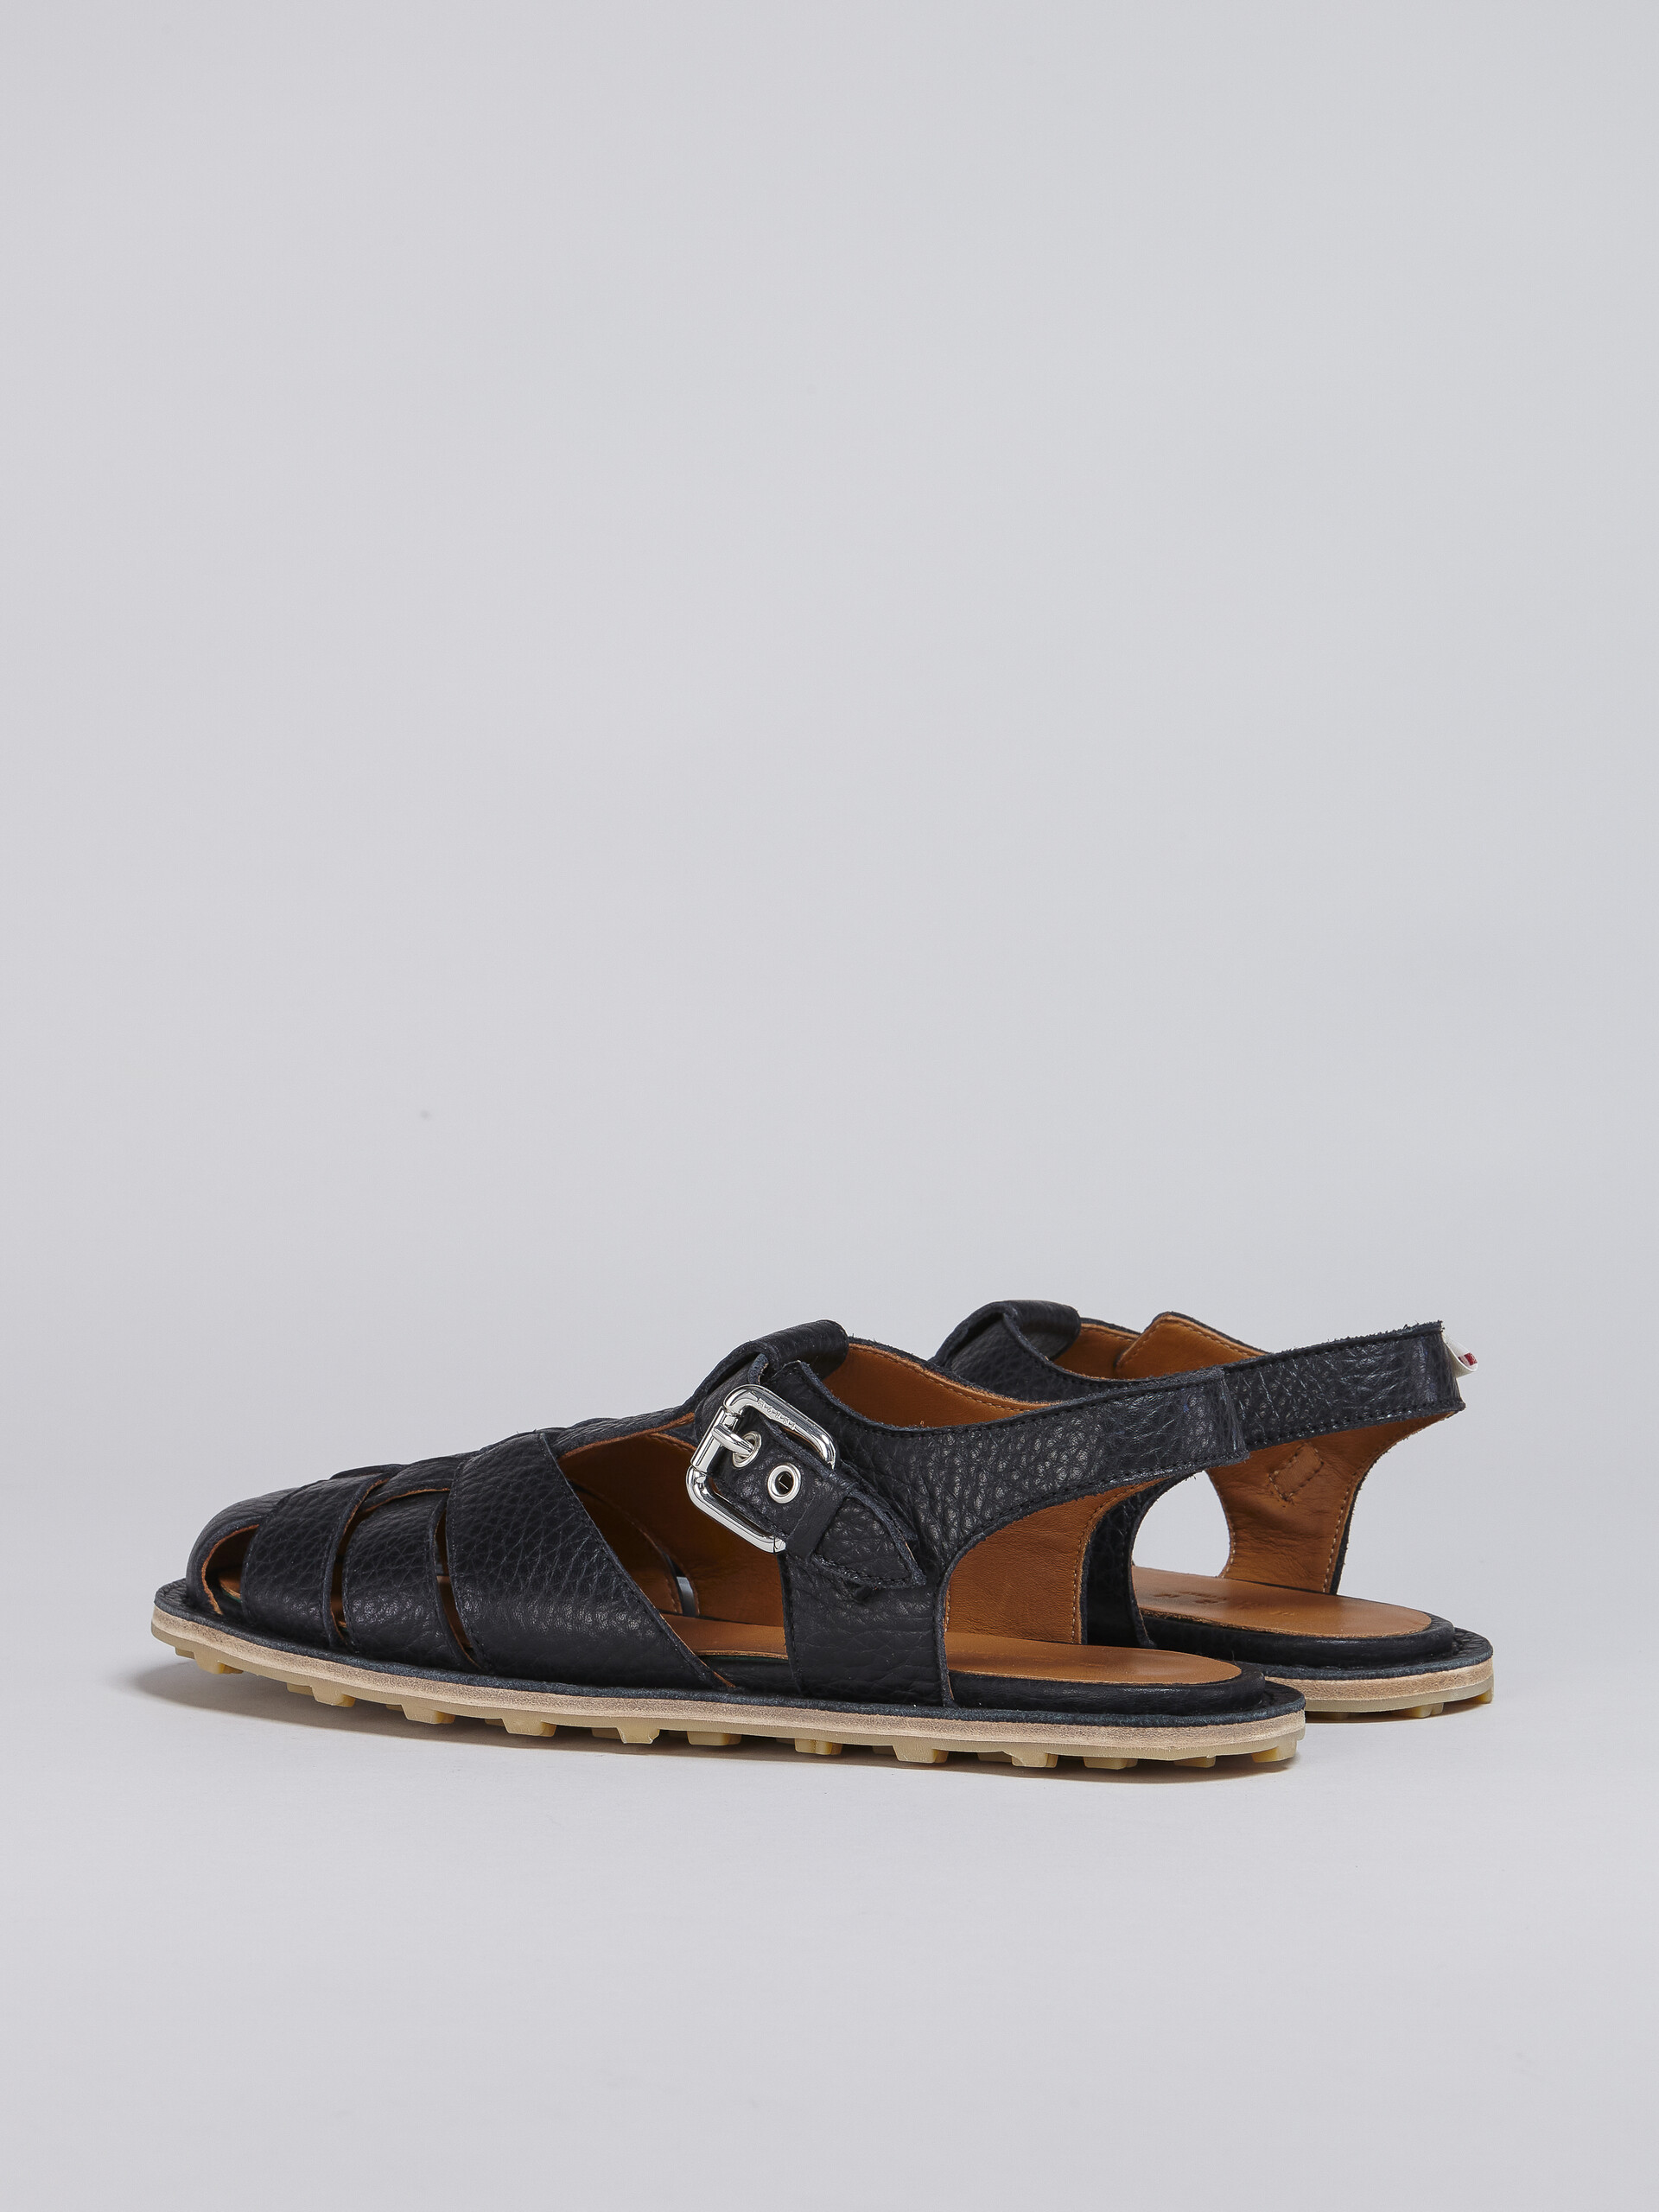 Grained calf leather Fisherman sandal - Sandals - Image 3